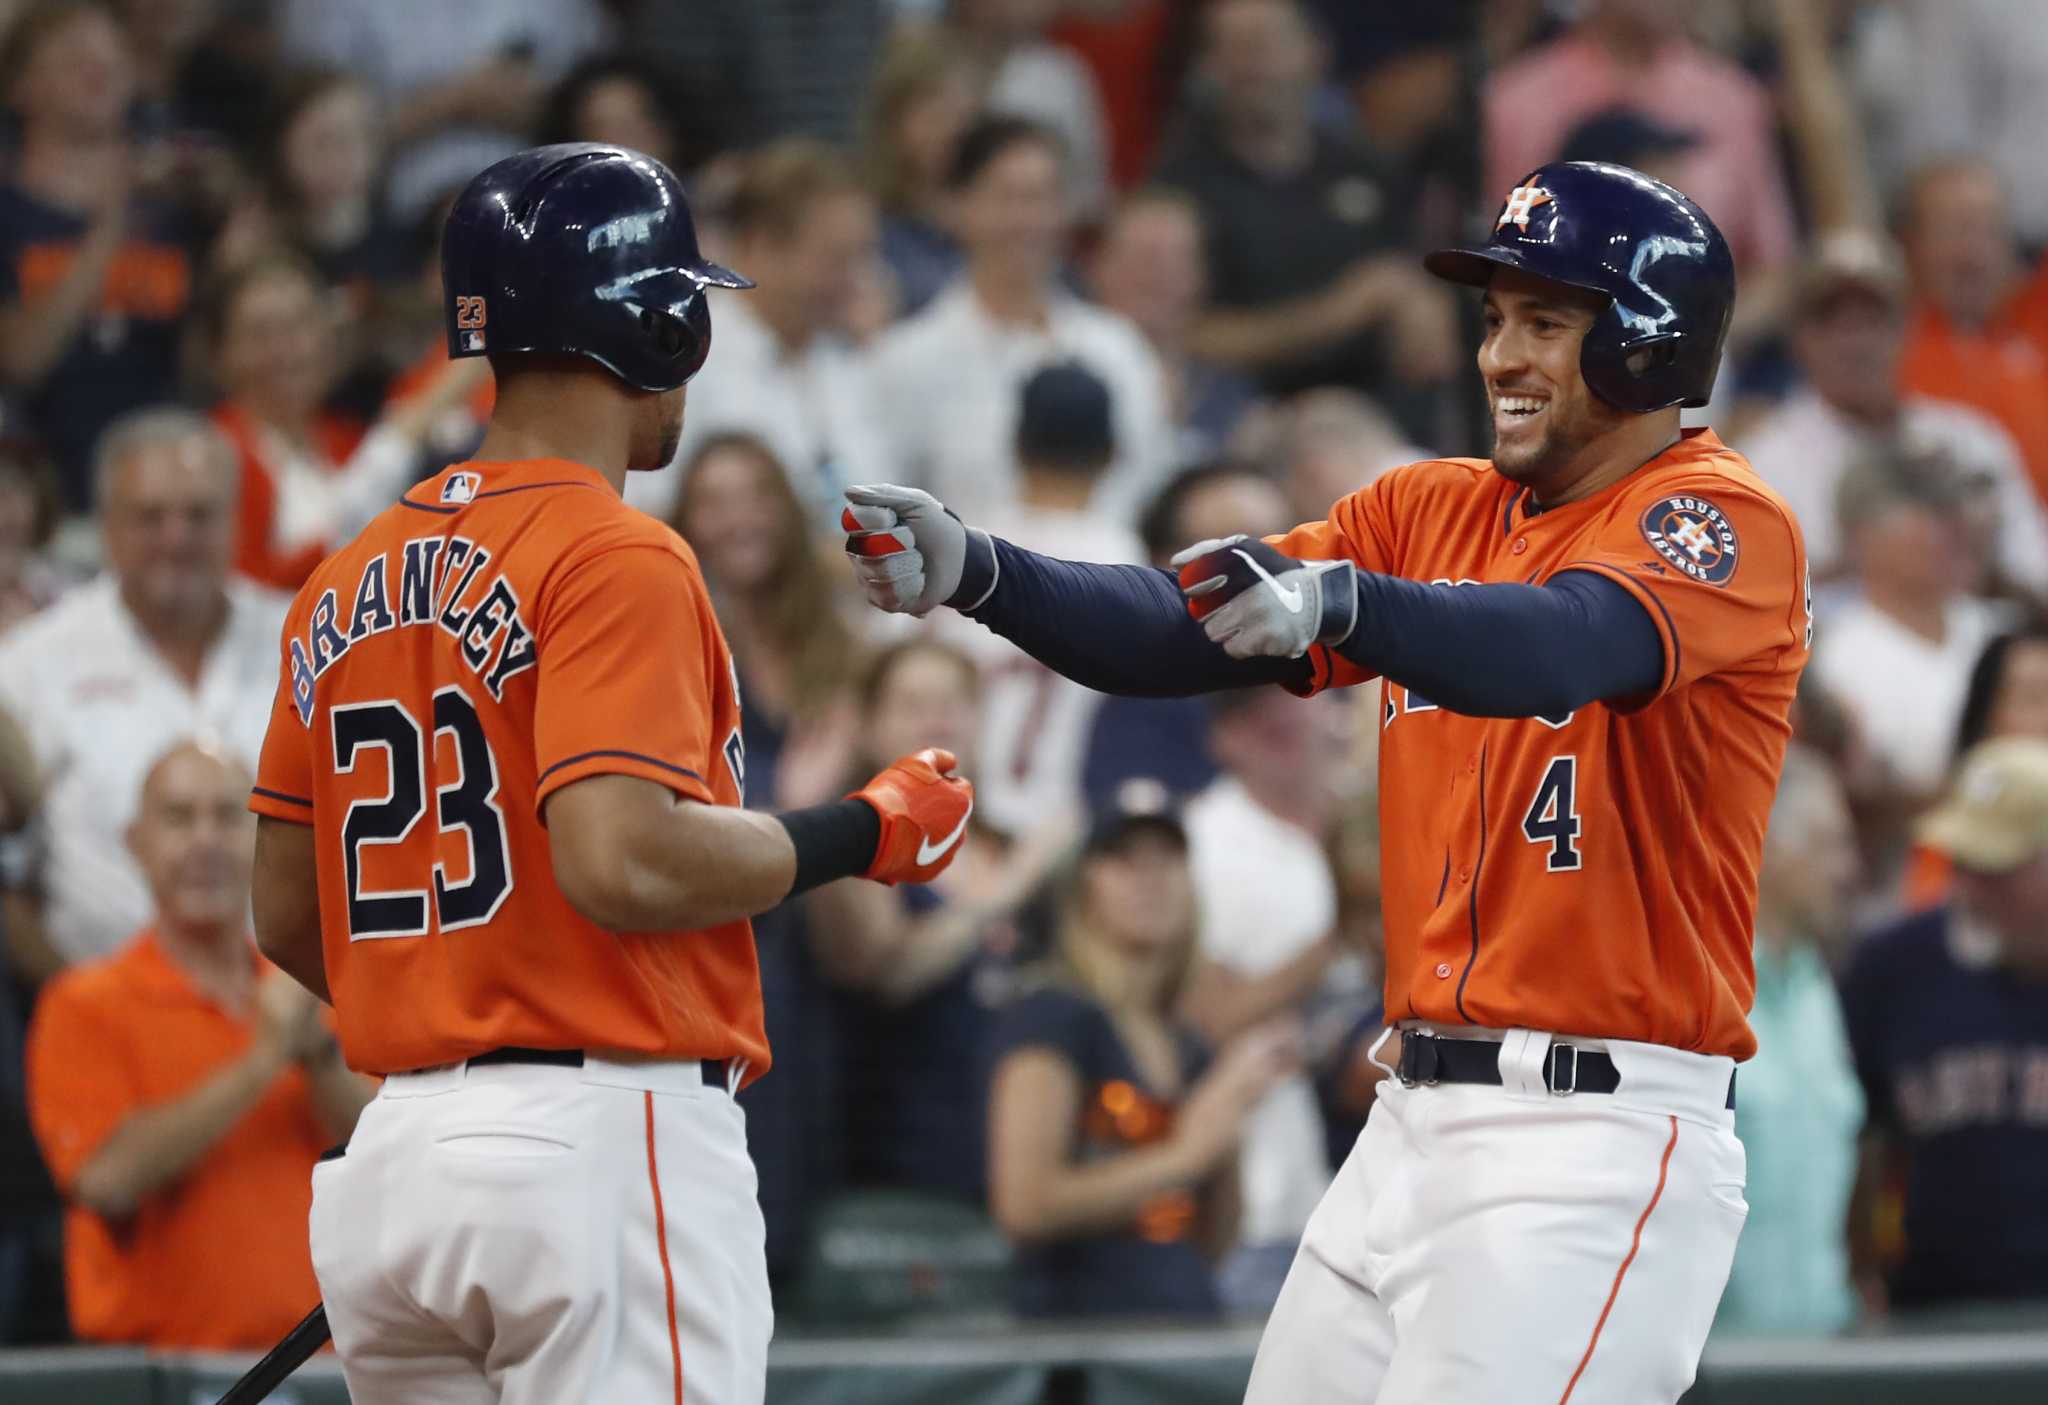 George Springer is gone. How do the Astros replace him?